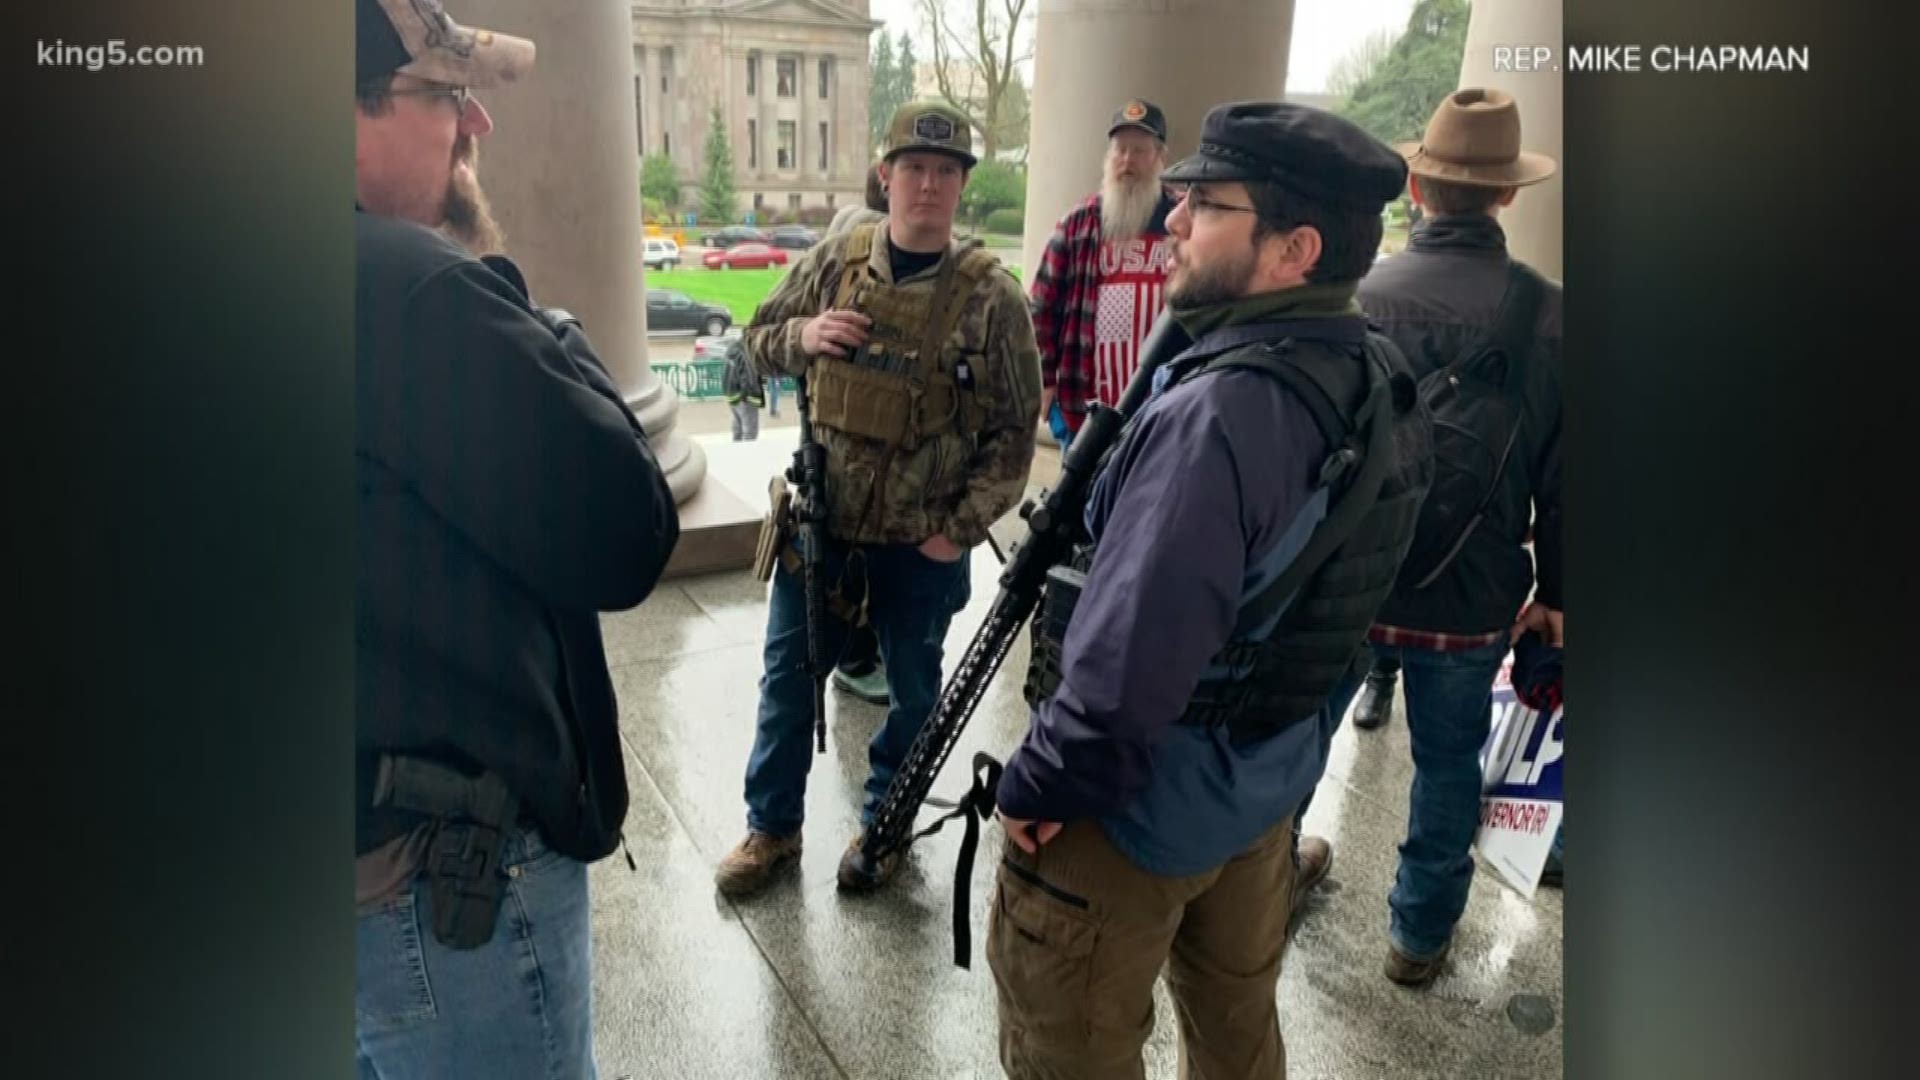 A state lawmaker wants to ban some guns from the Capitol campus, which comes after a gun-rights protest at the state Capitol.